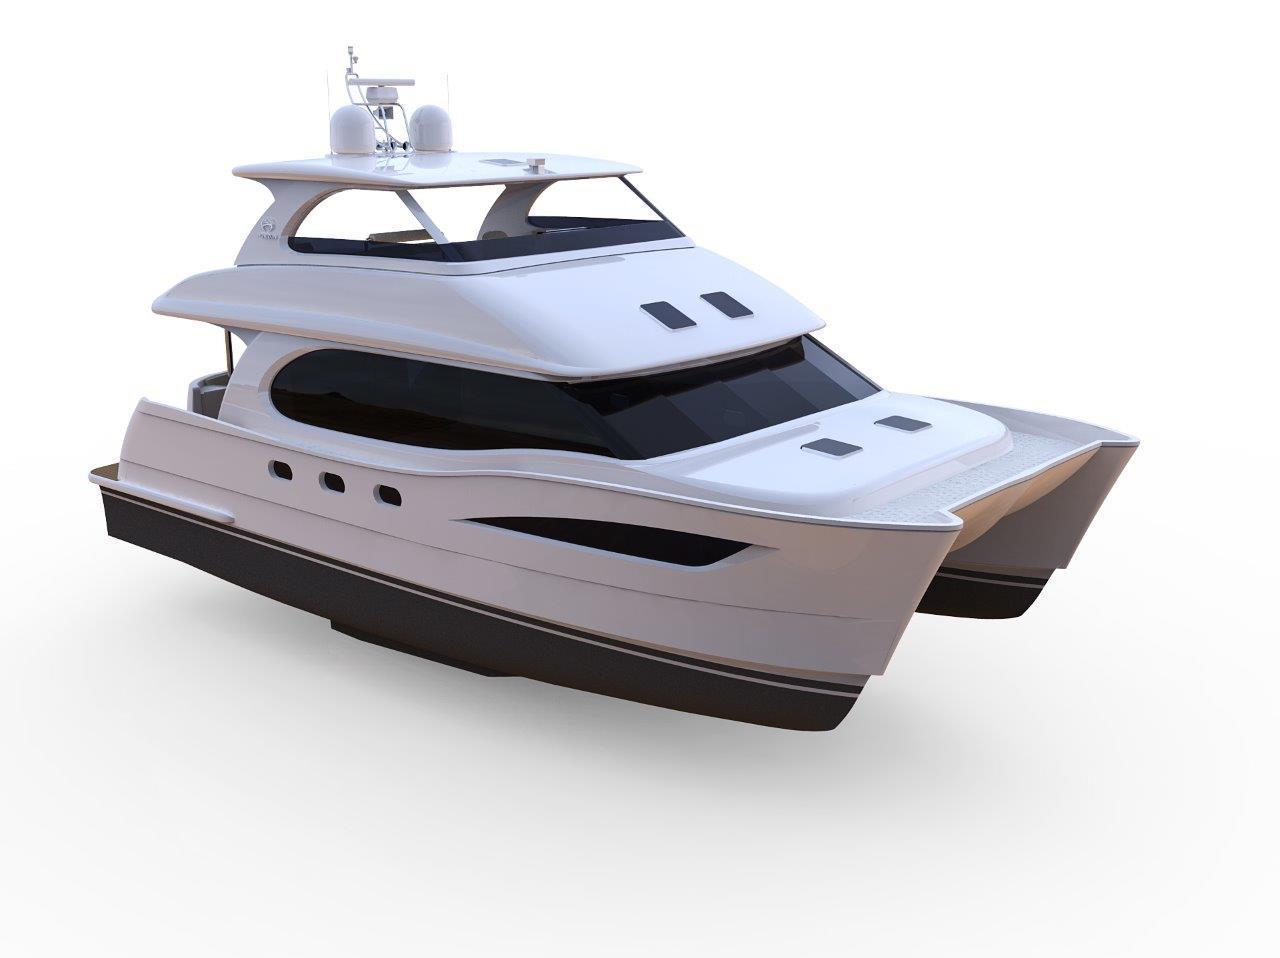 Horizon PC52 (New Boat Spec), Delivery to